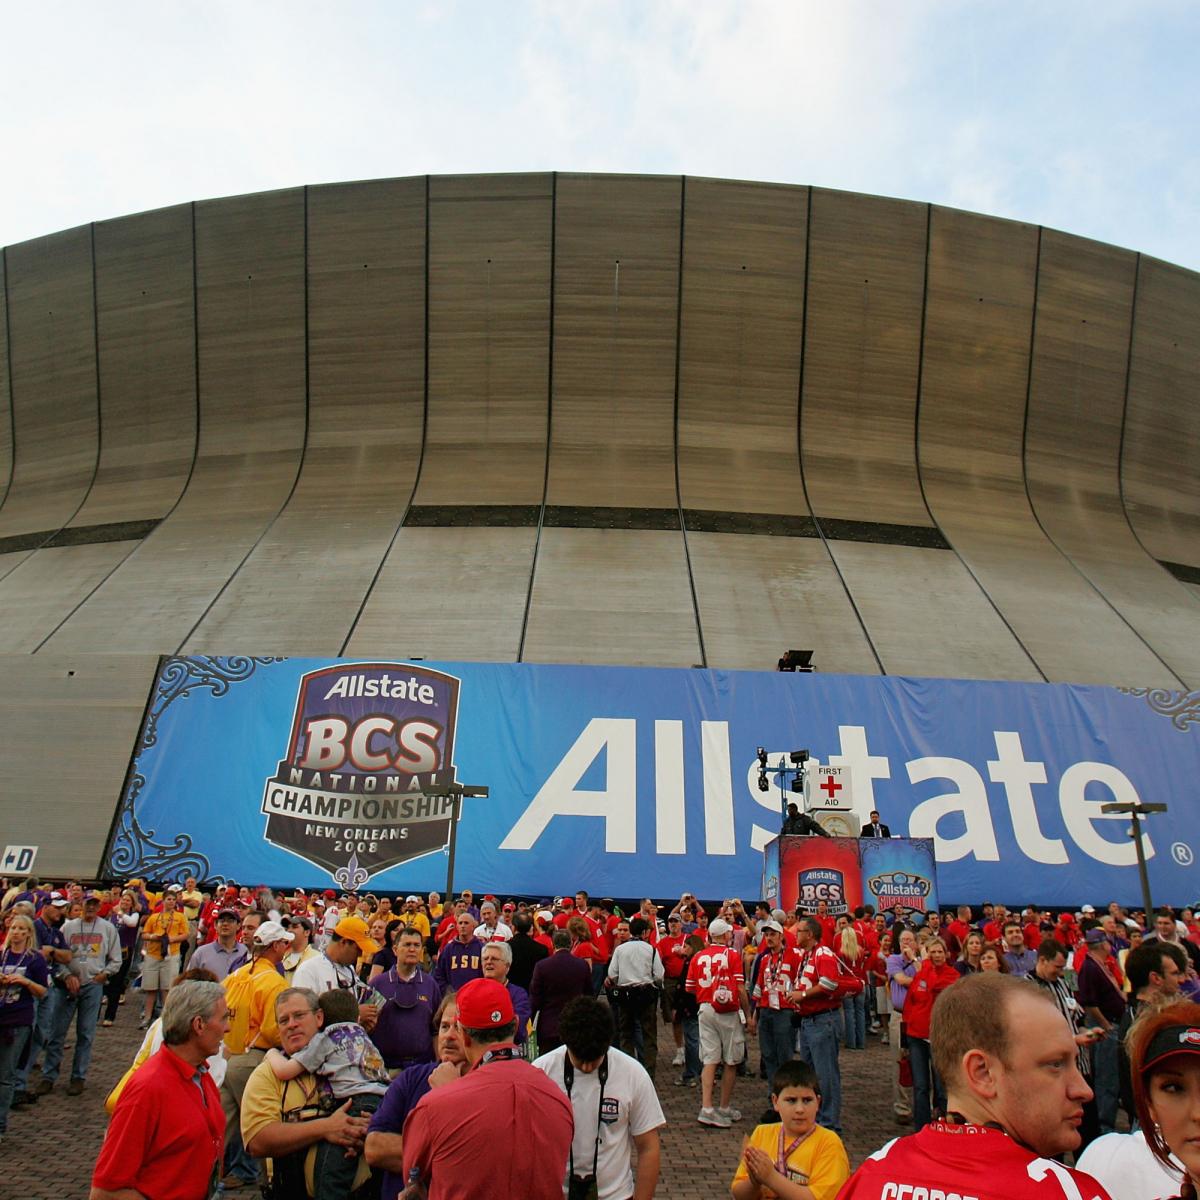 Sugar Bowl New Orleans Superdome Is Perfect Site to Host National